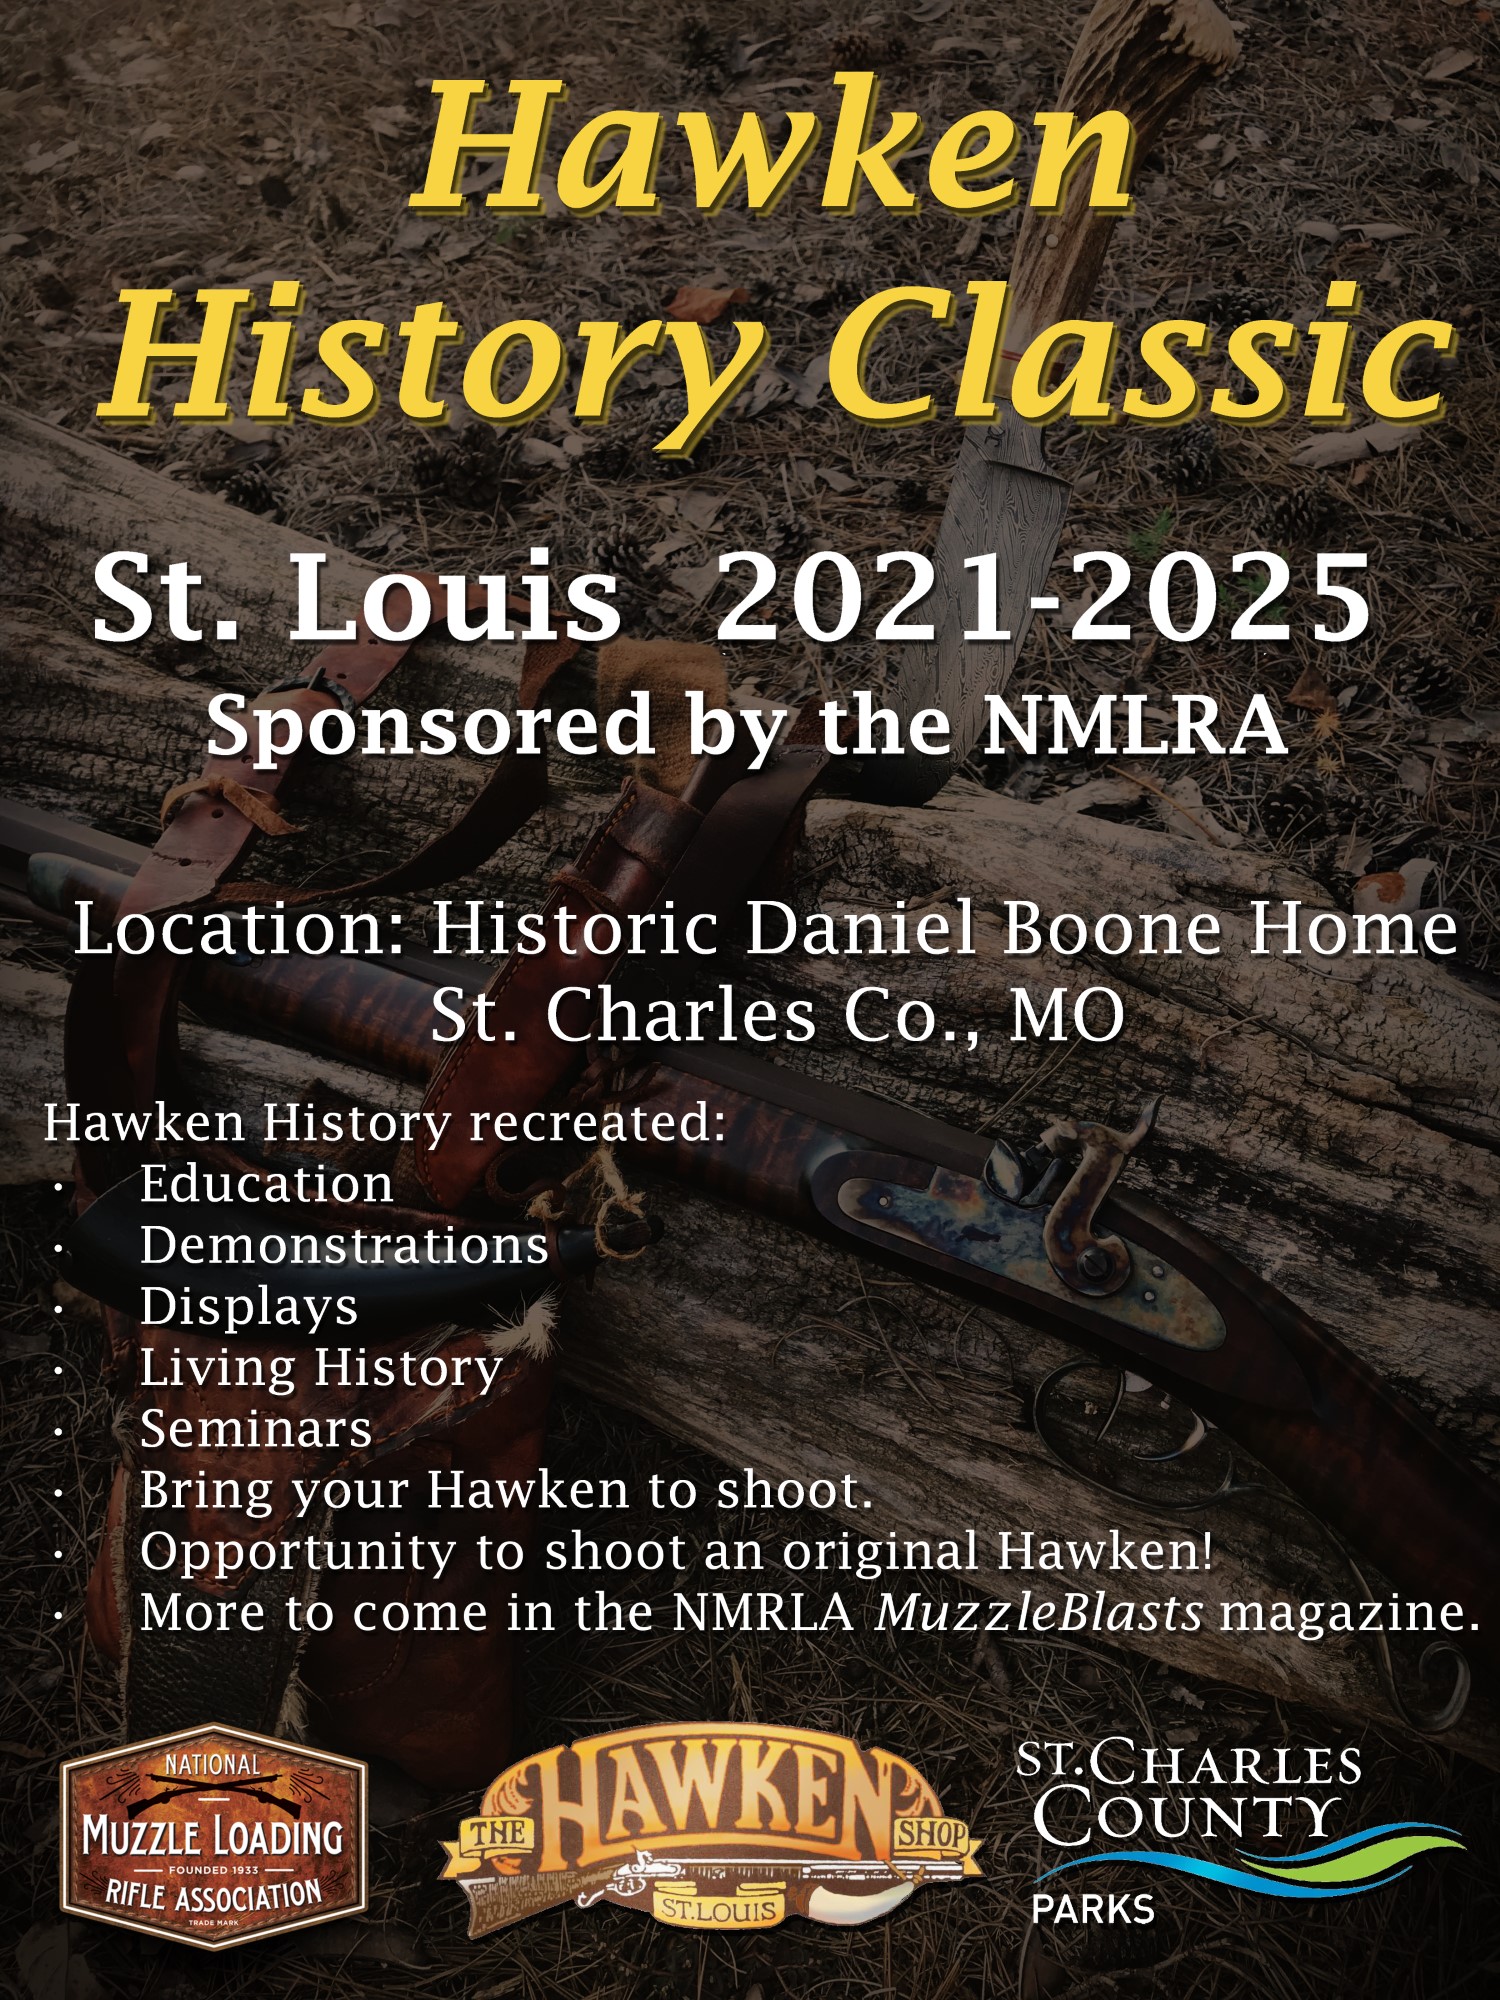 The Hawken History Classic — The NMLRA